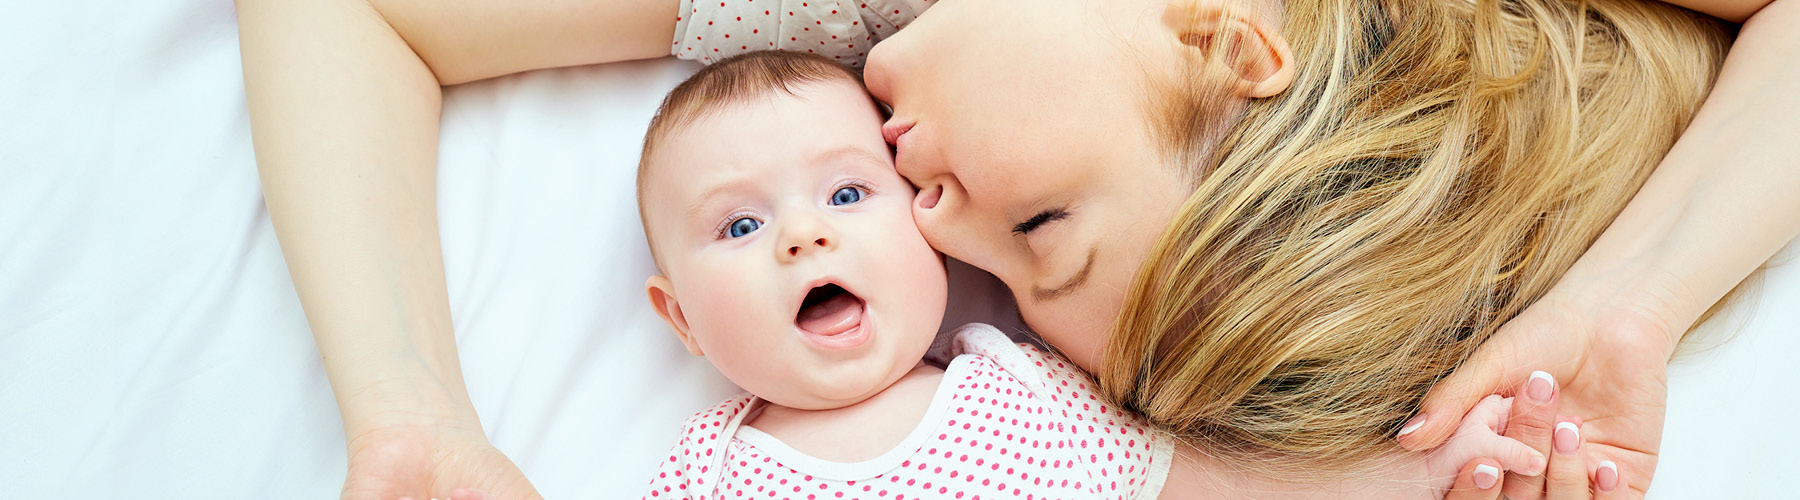 woman kissing a happy baby